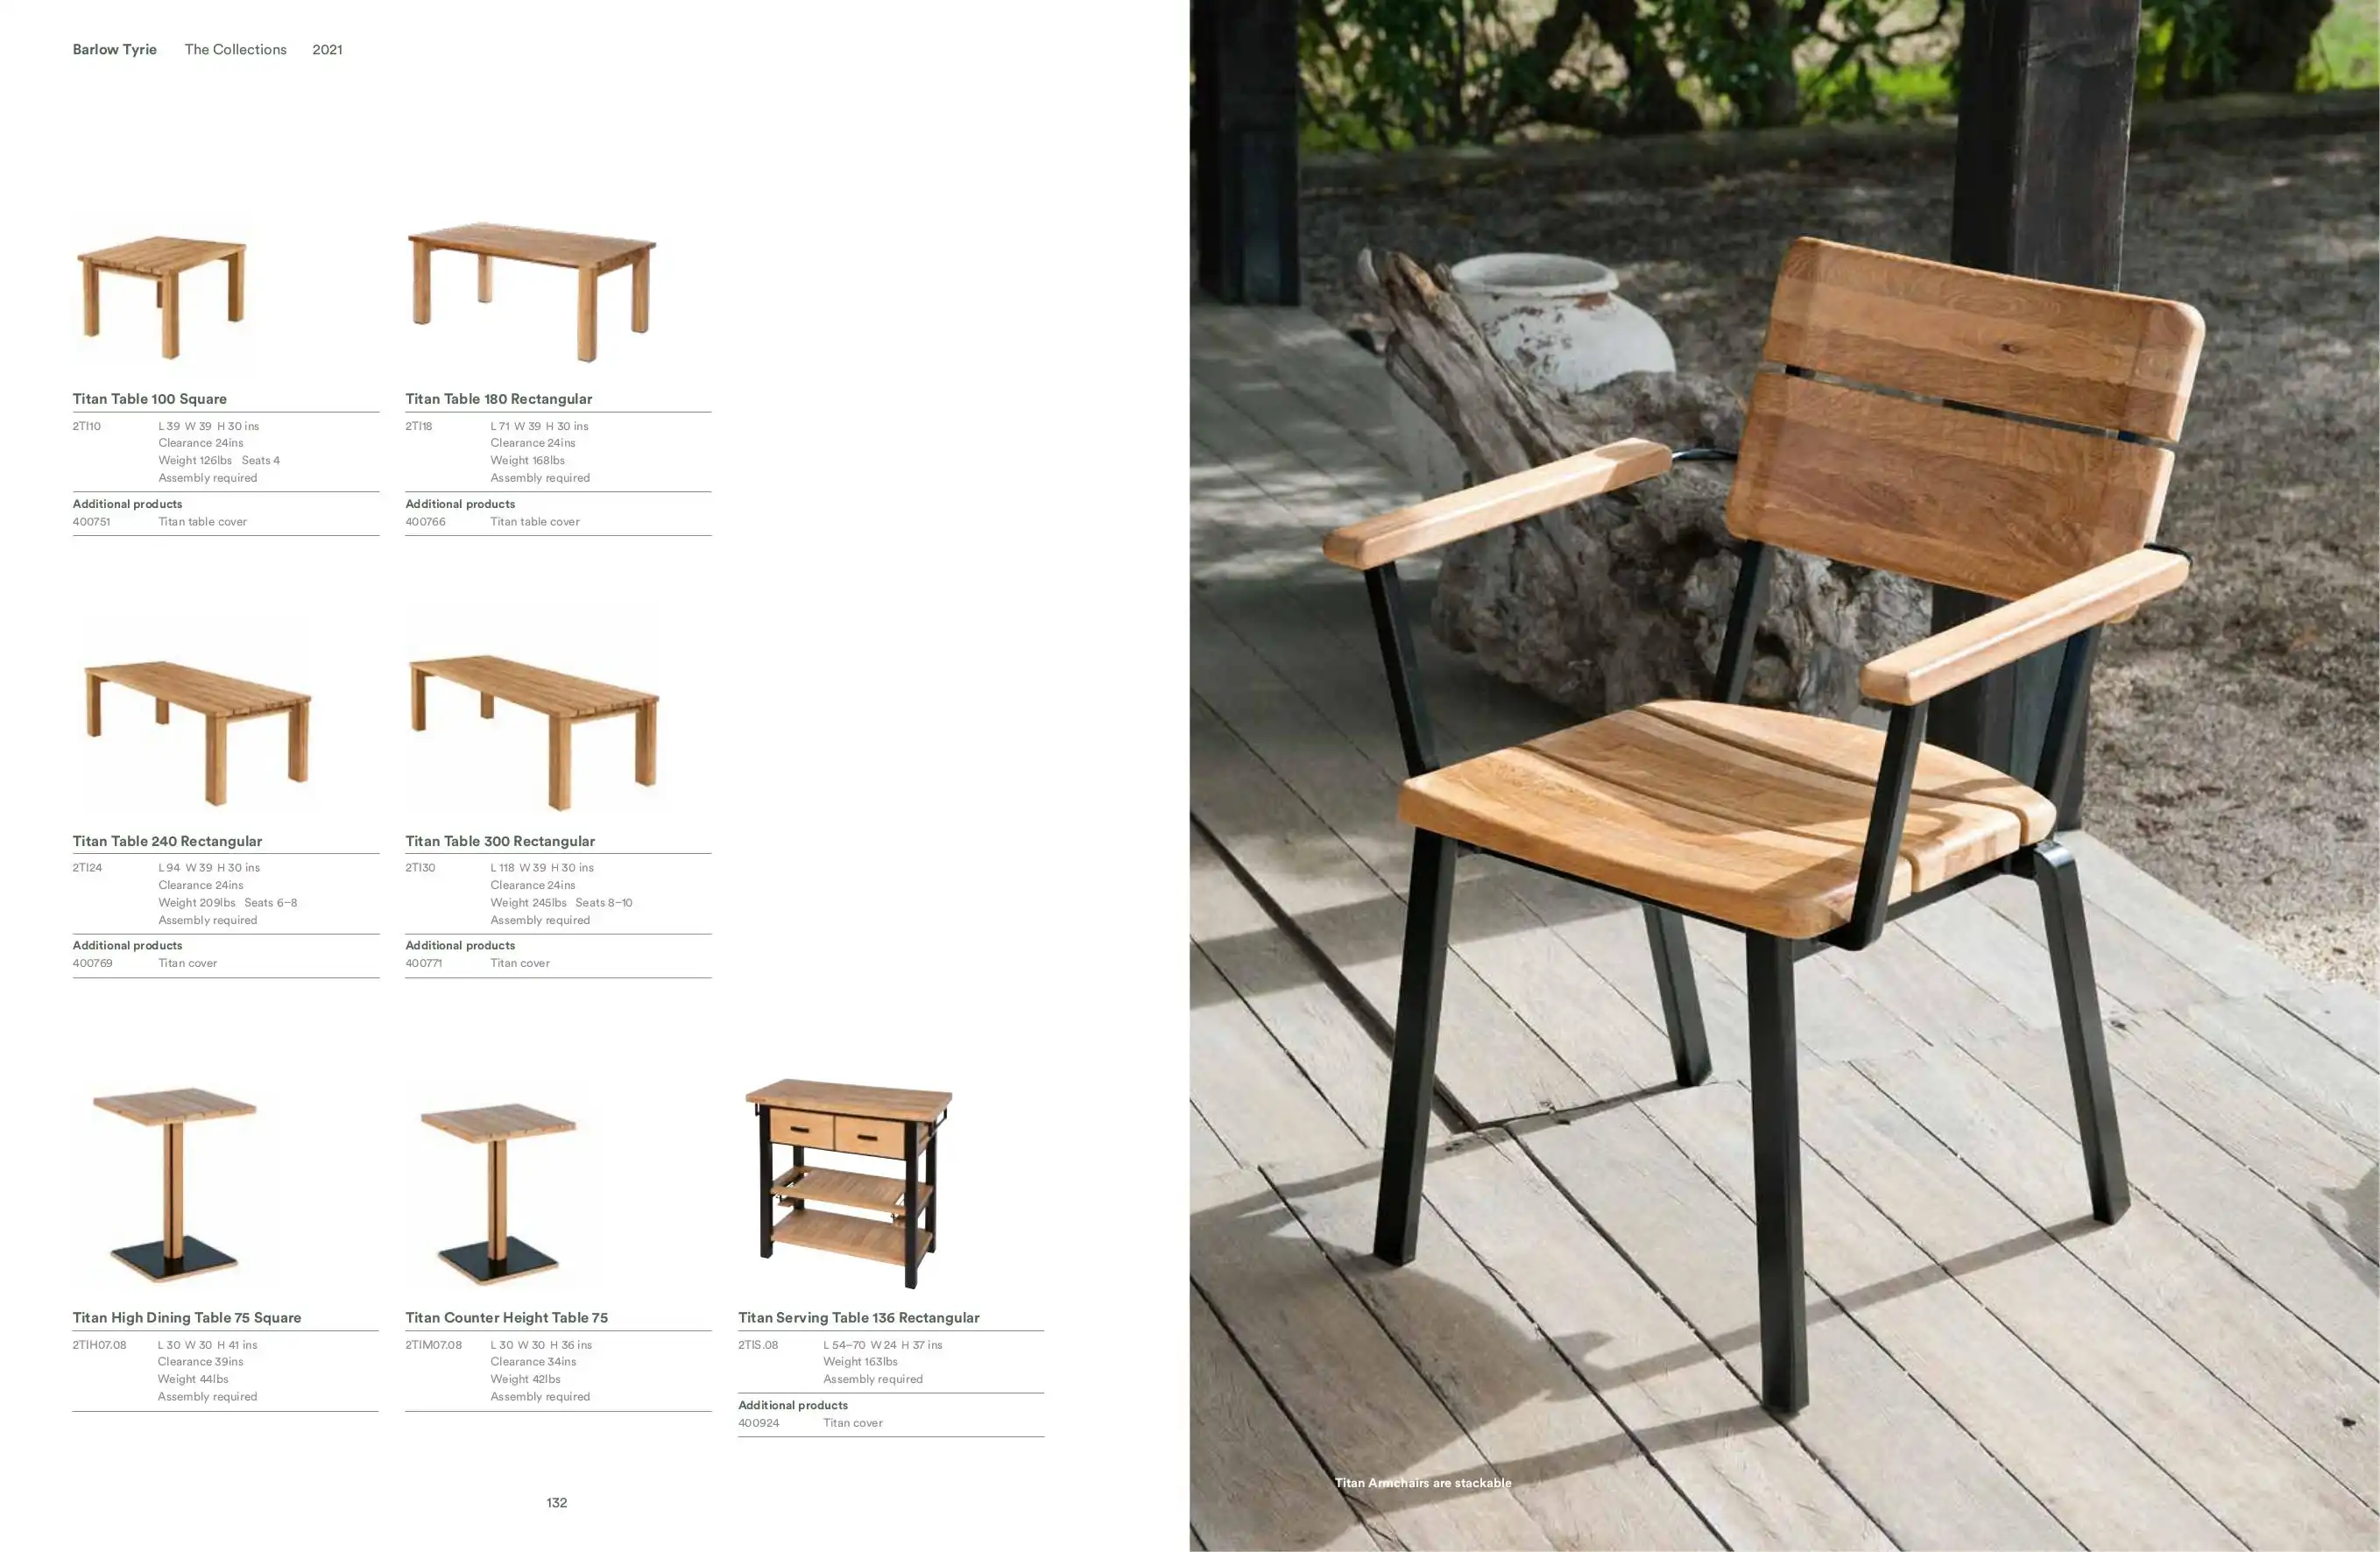 RUSTIC (Teak) Table & Benches by Barlow Tyrie